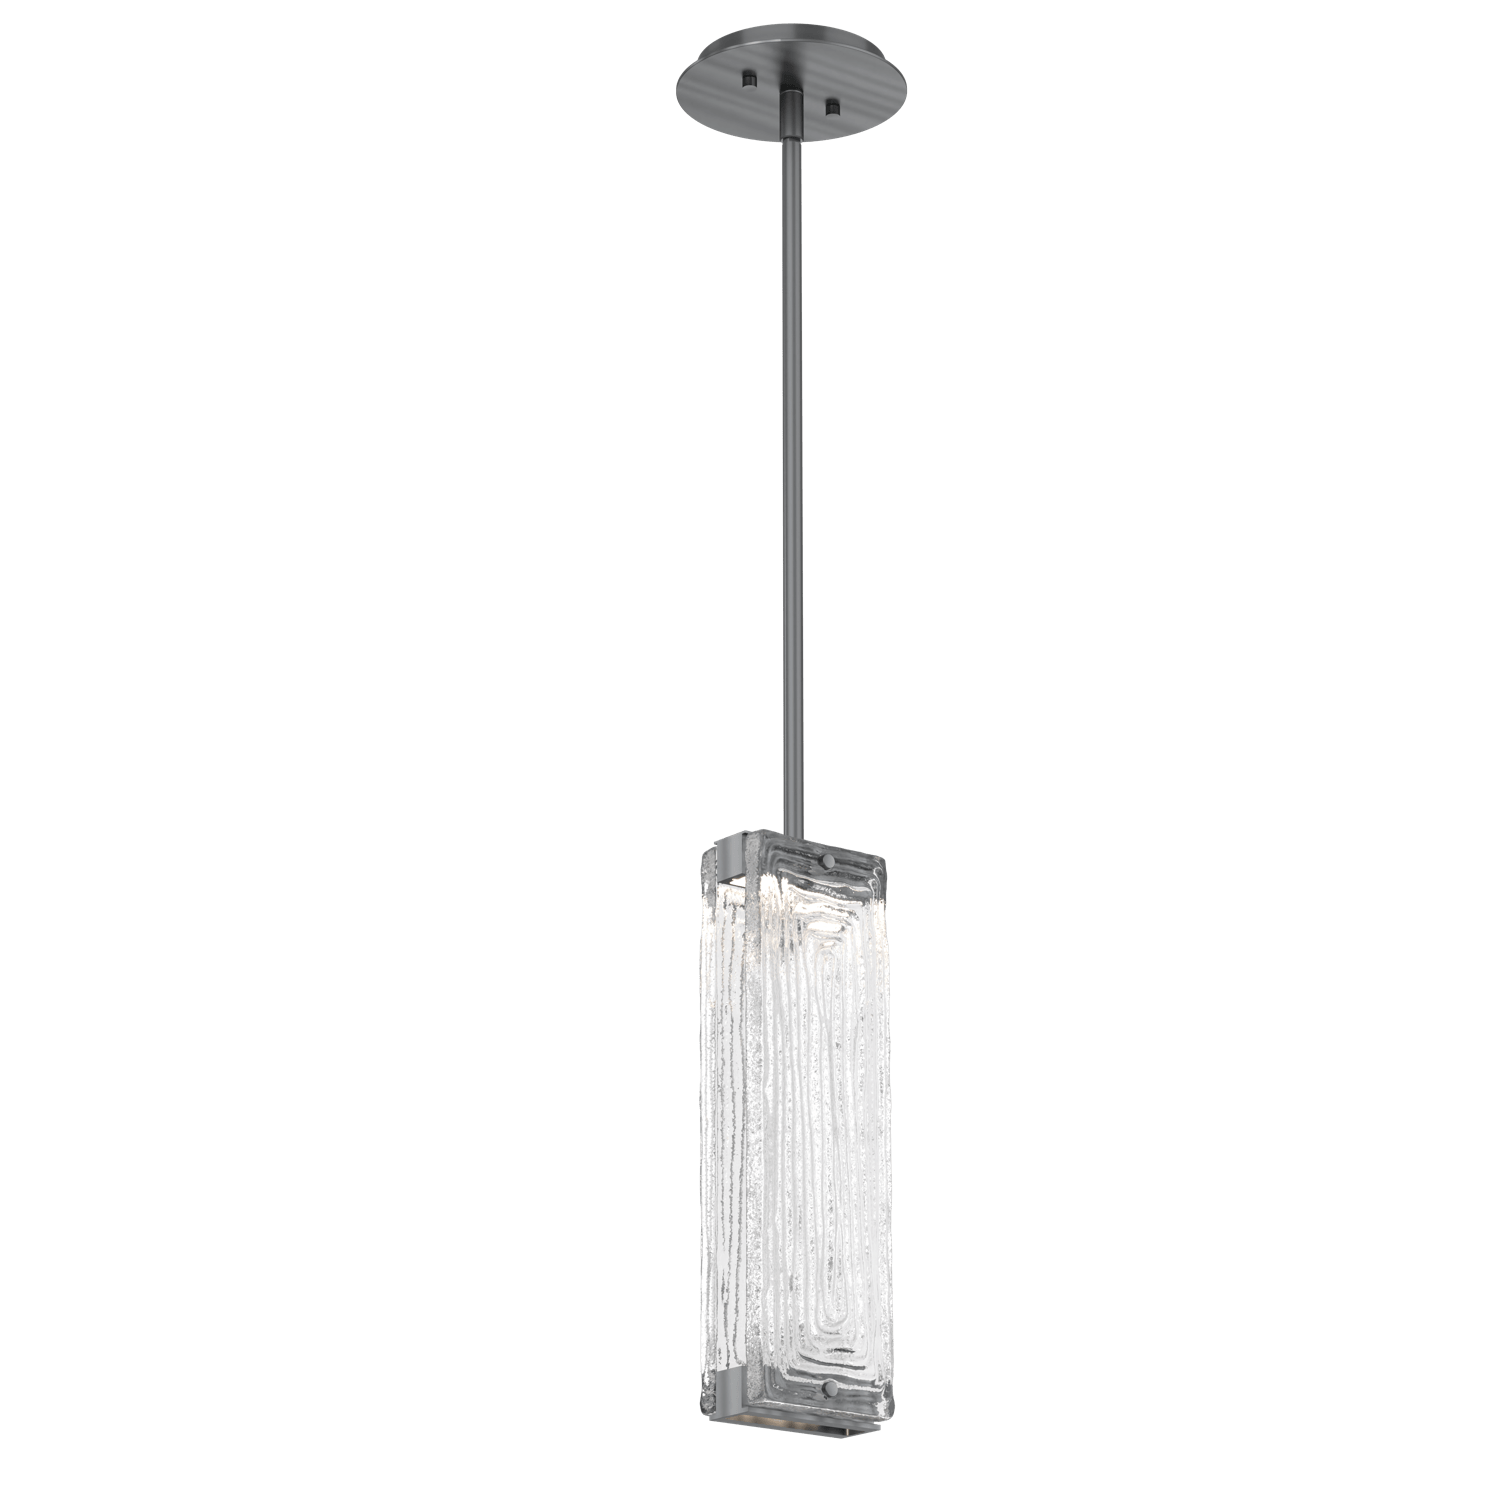 LAB0090-01-GM-TL-Hammerton-Studio-Tabulo-pendant-light-with-gunmetal-finish-and-clear-linea-cast-glass-shade-and-LED-lamping